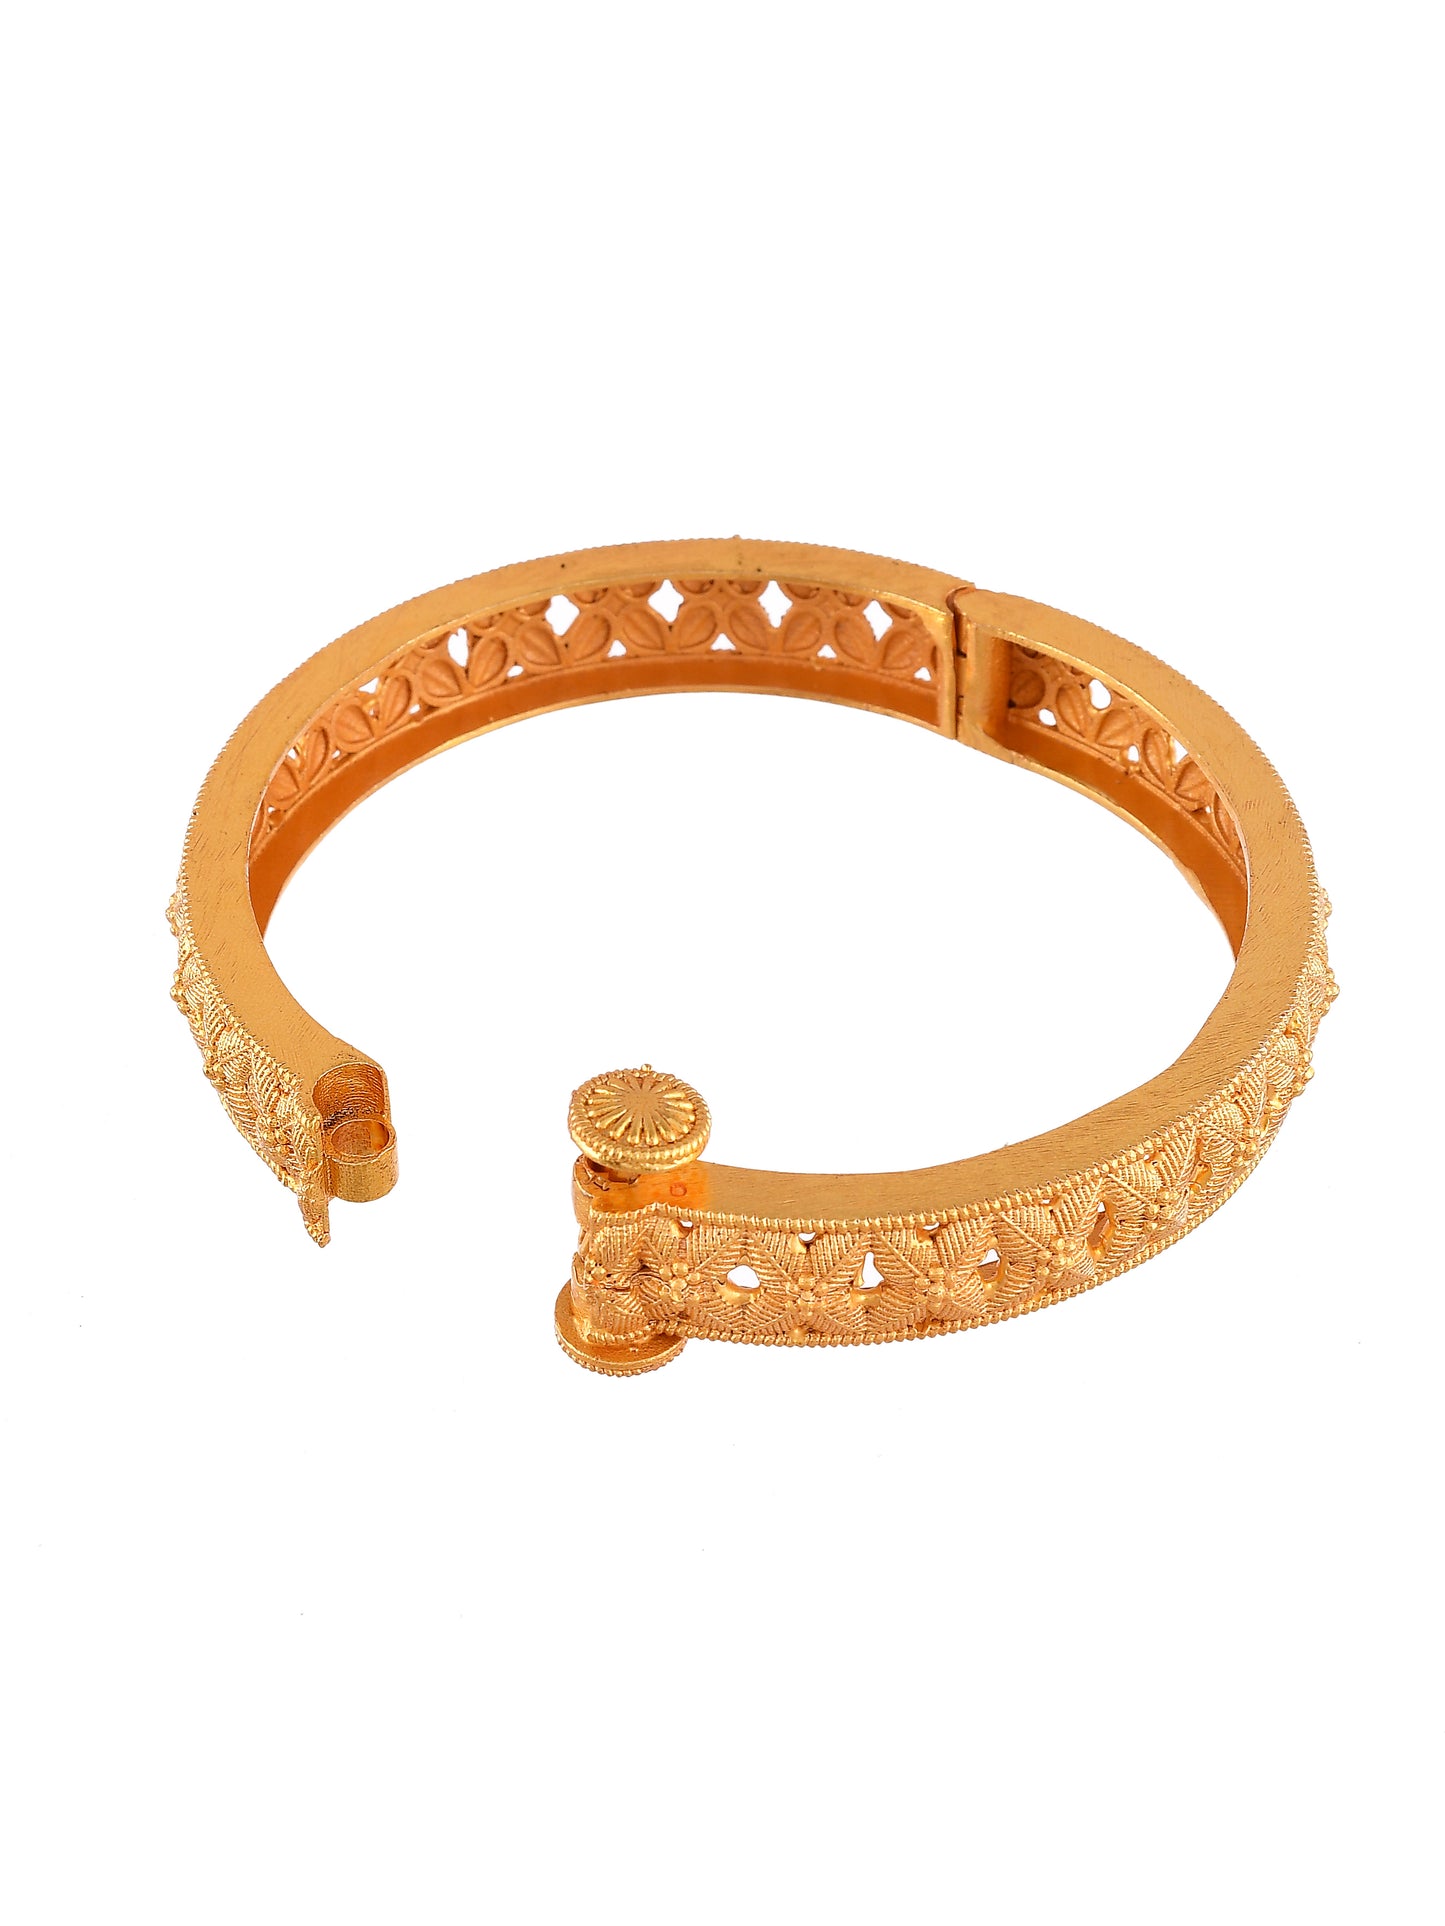 Traditional Floral Bangle Style Gold plated Bracelet